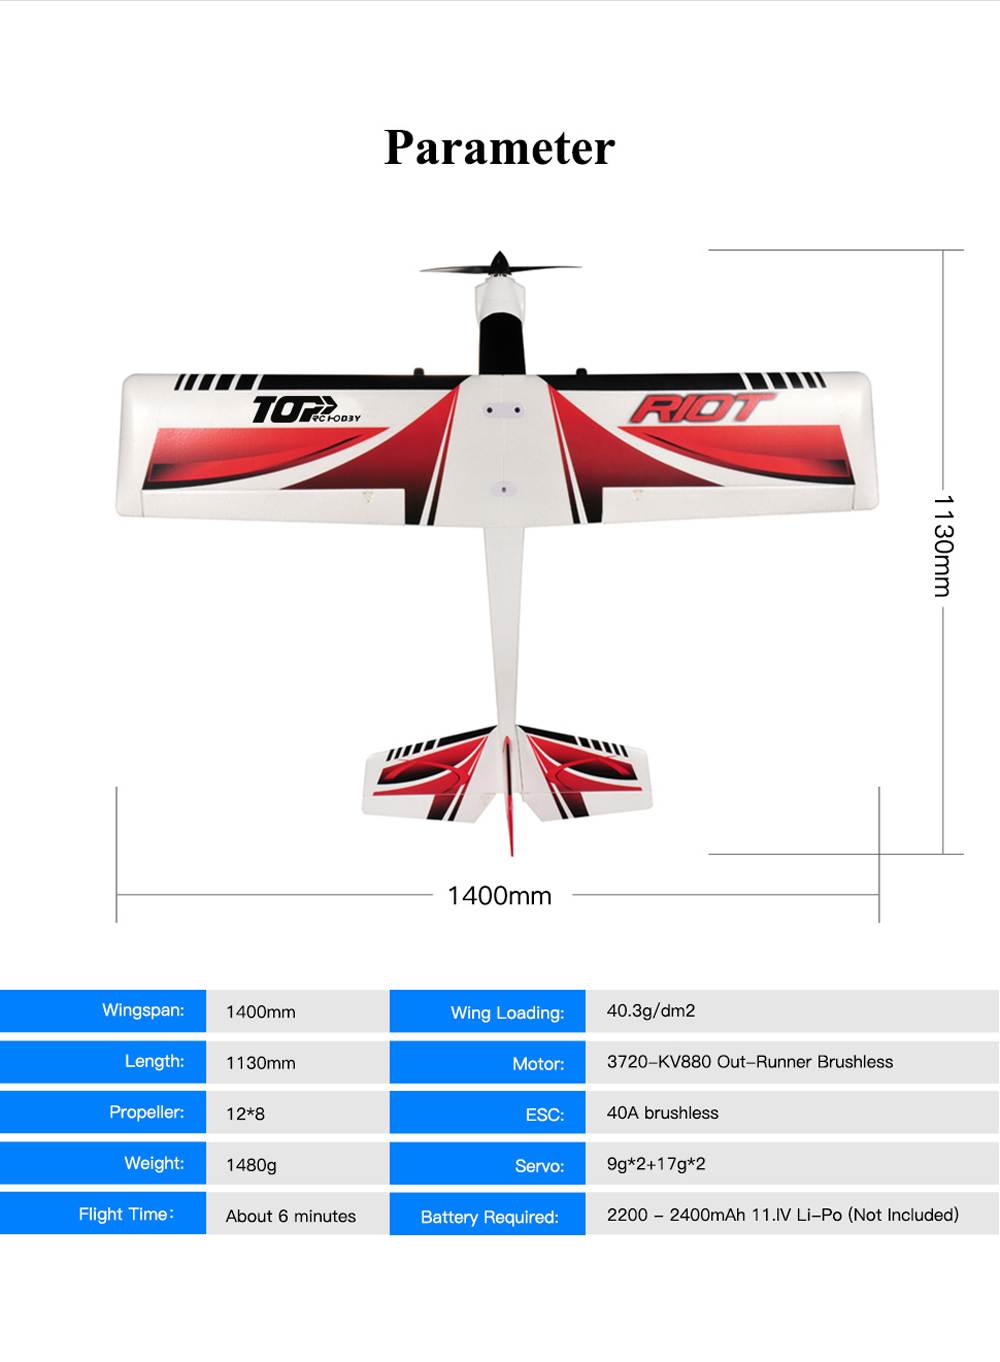 TOPRC-Hobby-RIOT-1400mm-Wingspan-EPO-Practice-Sport-Plane-RC-Airplane-PNP-for-Trainer-Beginners-1736767-1